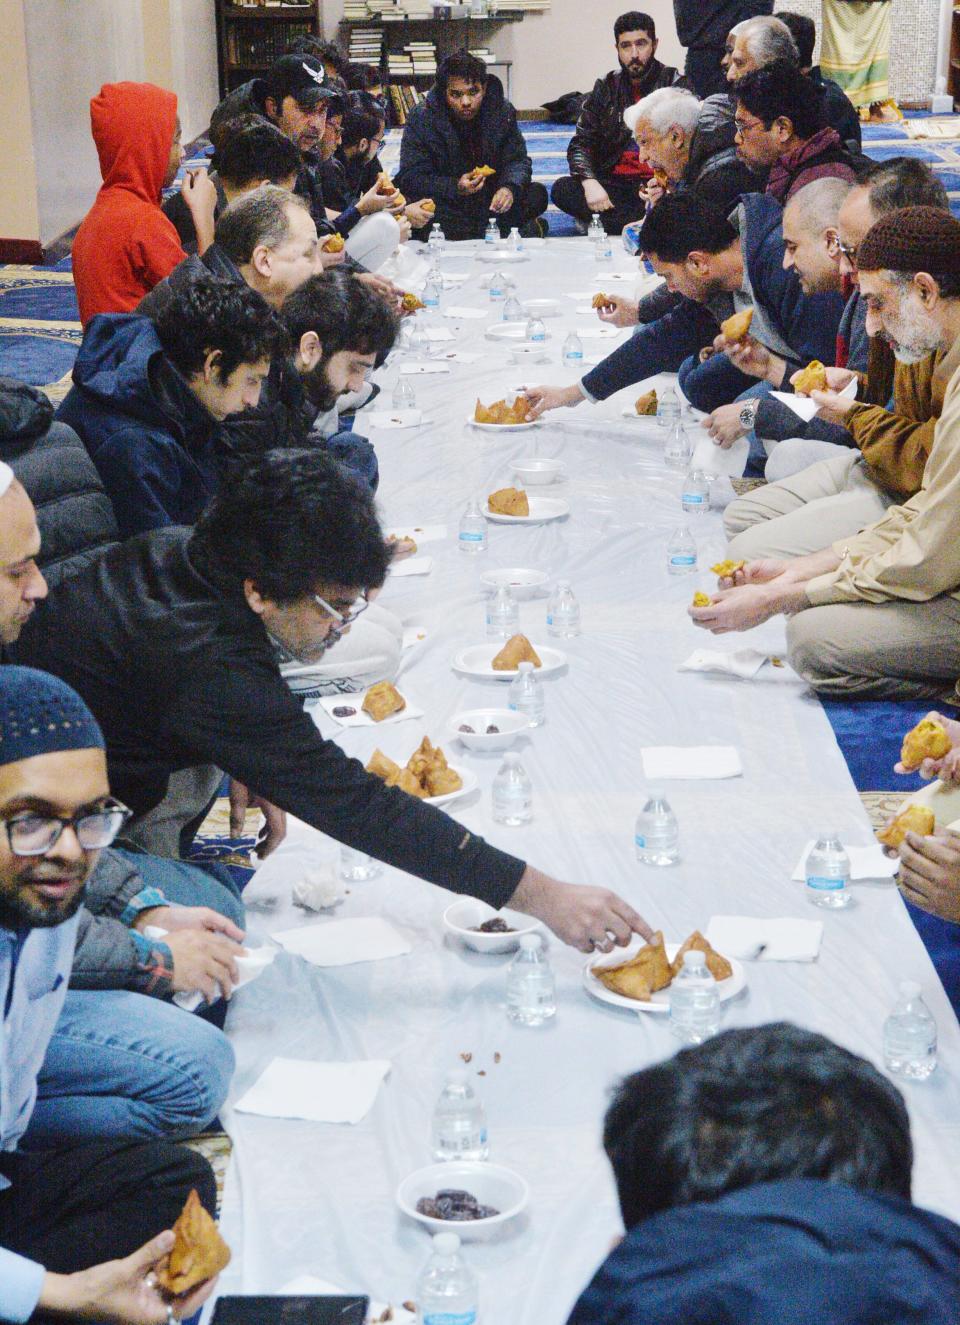 Men begin to eat to observe the iftar, or breakfast breaking the daily fast during Ramadan, at the Erie Masjid on April 1, 2023. Those of the Muslim faith fast from sunrise to sunset during Ramadan, which began on March 22 and ends on April 21. Women in the Masjid were eating in a separate area of the building.